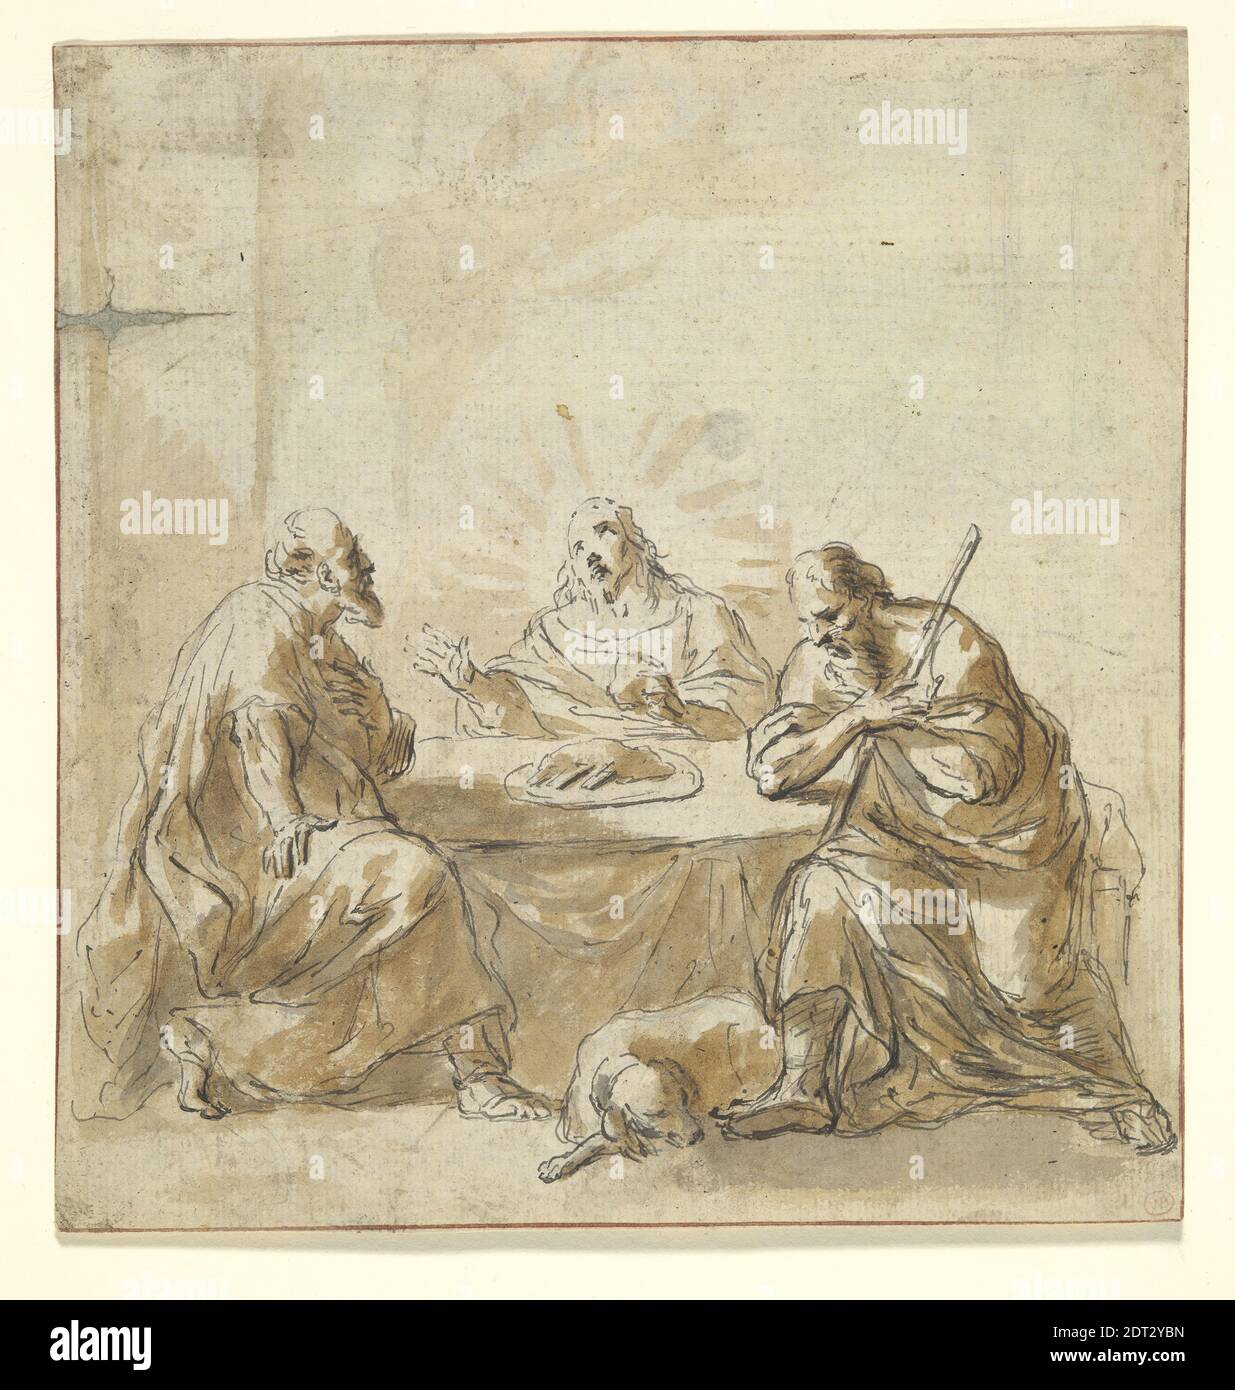 Artist: Leonard Bramer, Dutch, 1596–1674, Supper at Emmaus, Pen and ink, brown and grey wash, sheet: 18.6 × 17.4 cm (7 5/16 × 6 7/8 in.), Made in The Netherlands, Dutch, 17th century, Works on Paper - Drawings and Watercolors Stock Photo